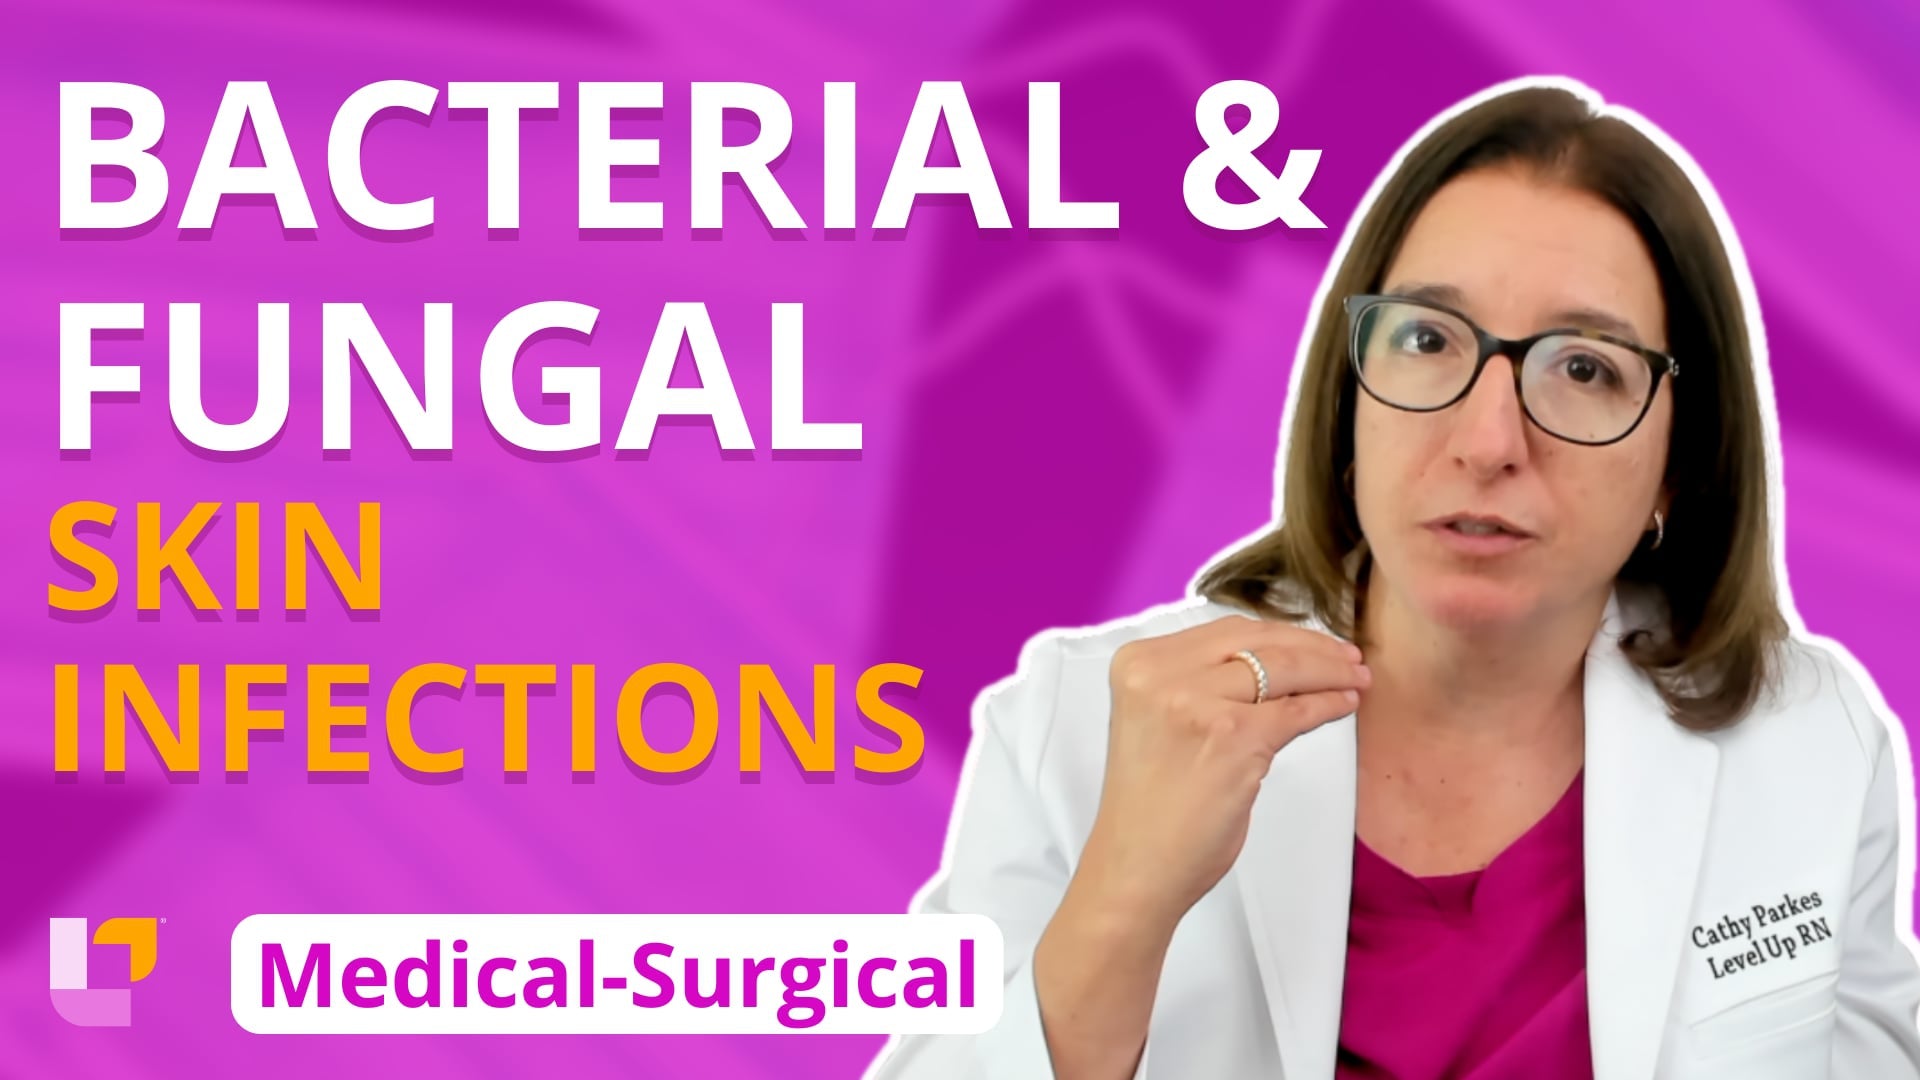 Med-Surg - Integumentary System, part 4: Bacterial & Fungal Skin Infections - LevelUpRN